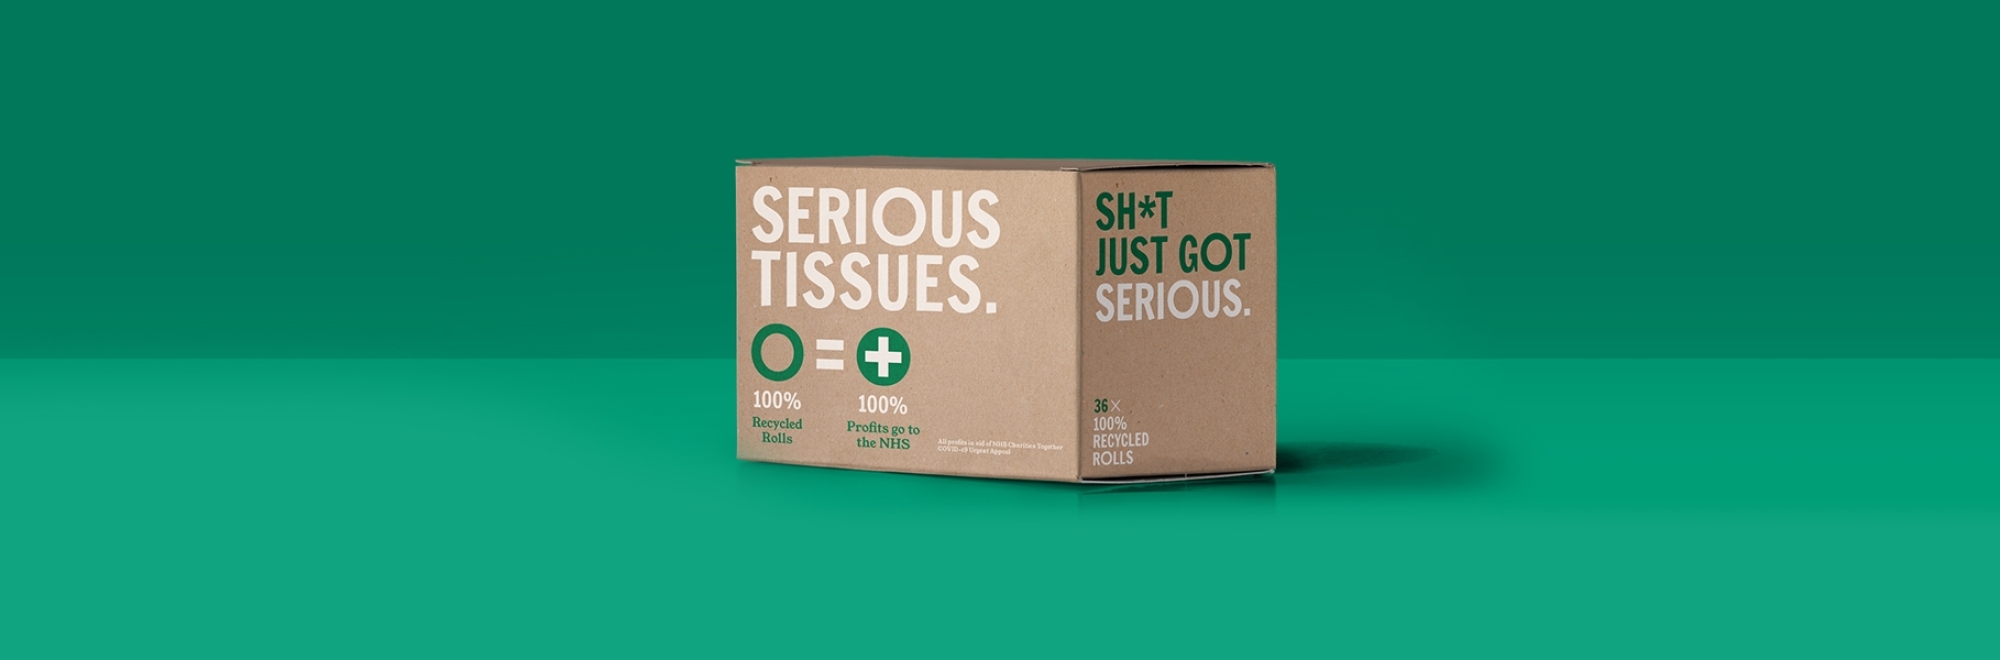 Serious Tissues toilet roll launches to support NHS frontline workers, with branding by Above+Beyond